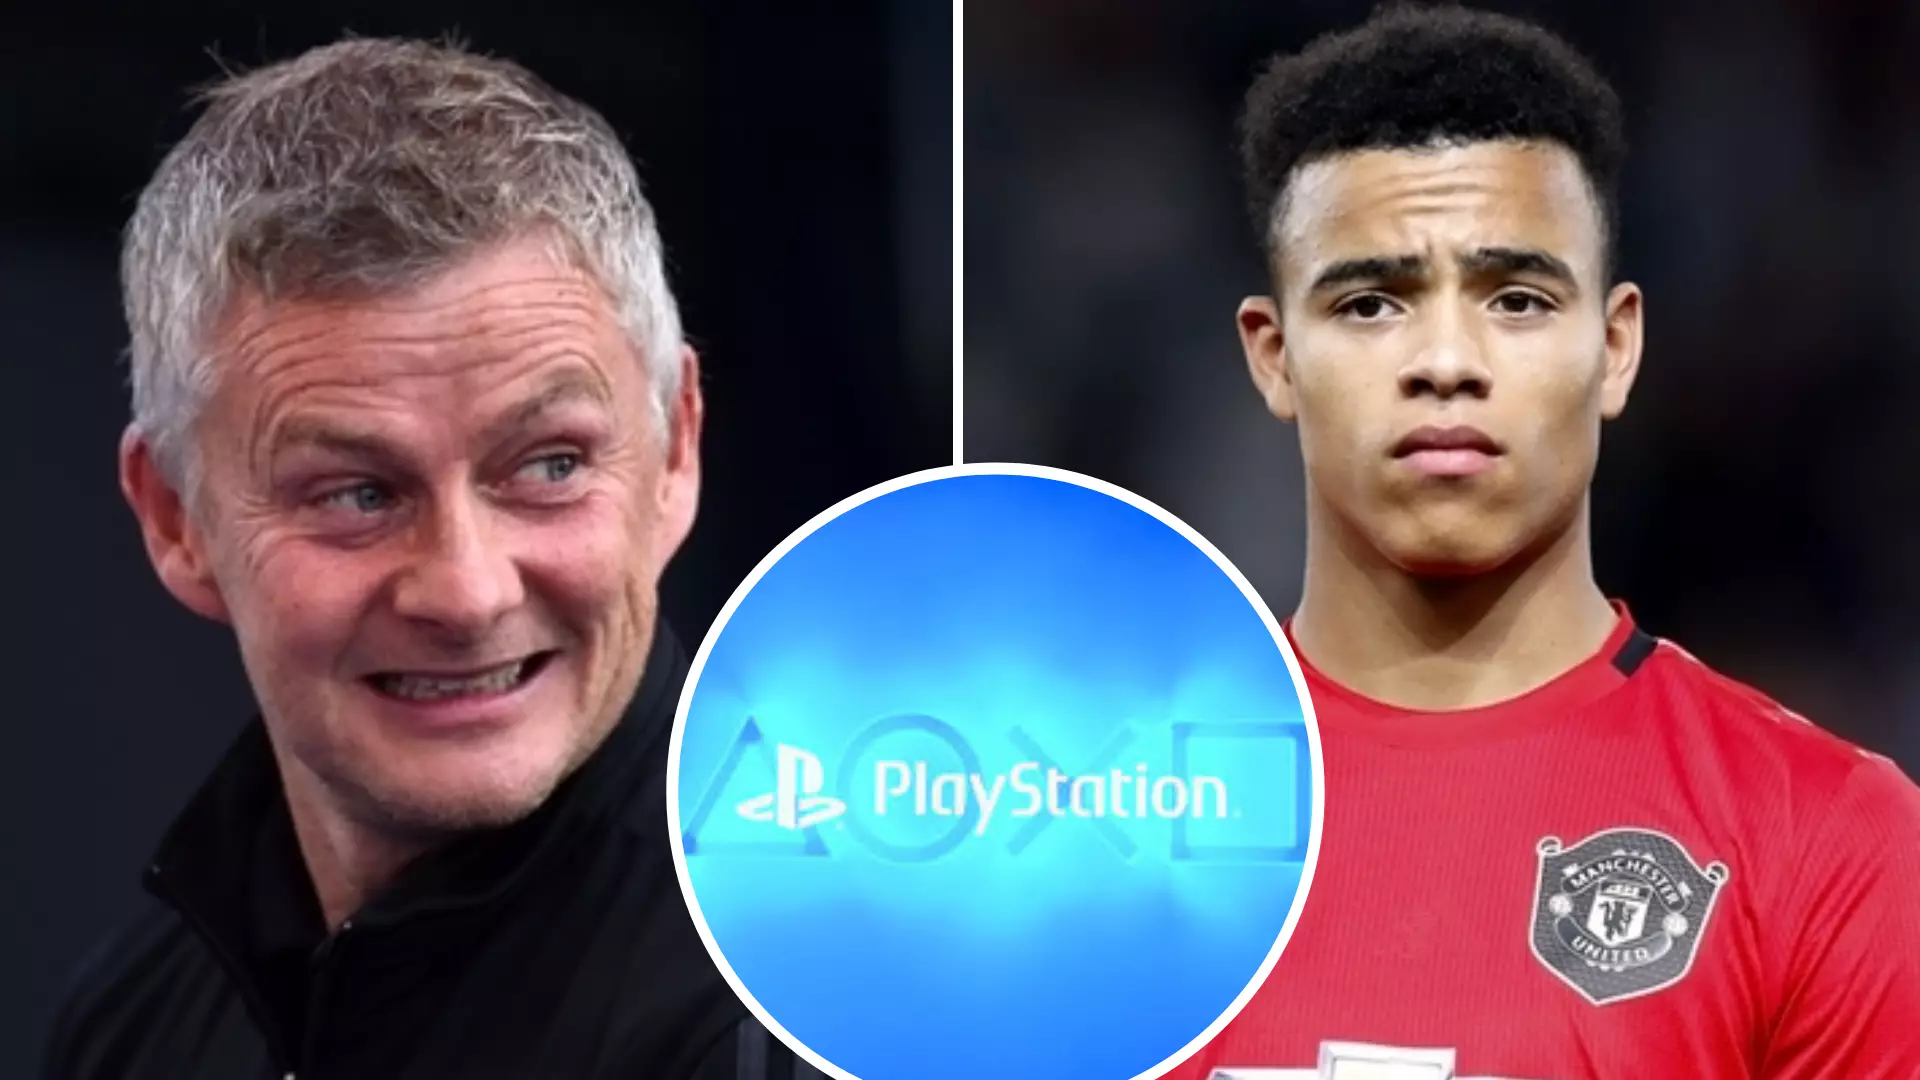 PlayStation Send Hilarious Message To Mason Greenwood After Ole Gunnar Solskjaer’s Latest Comments